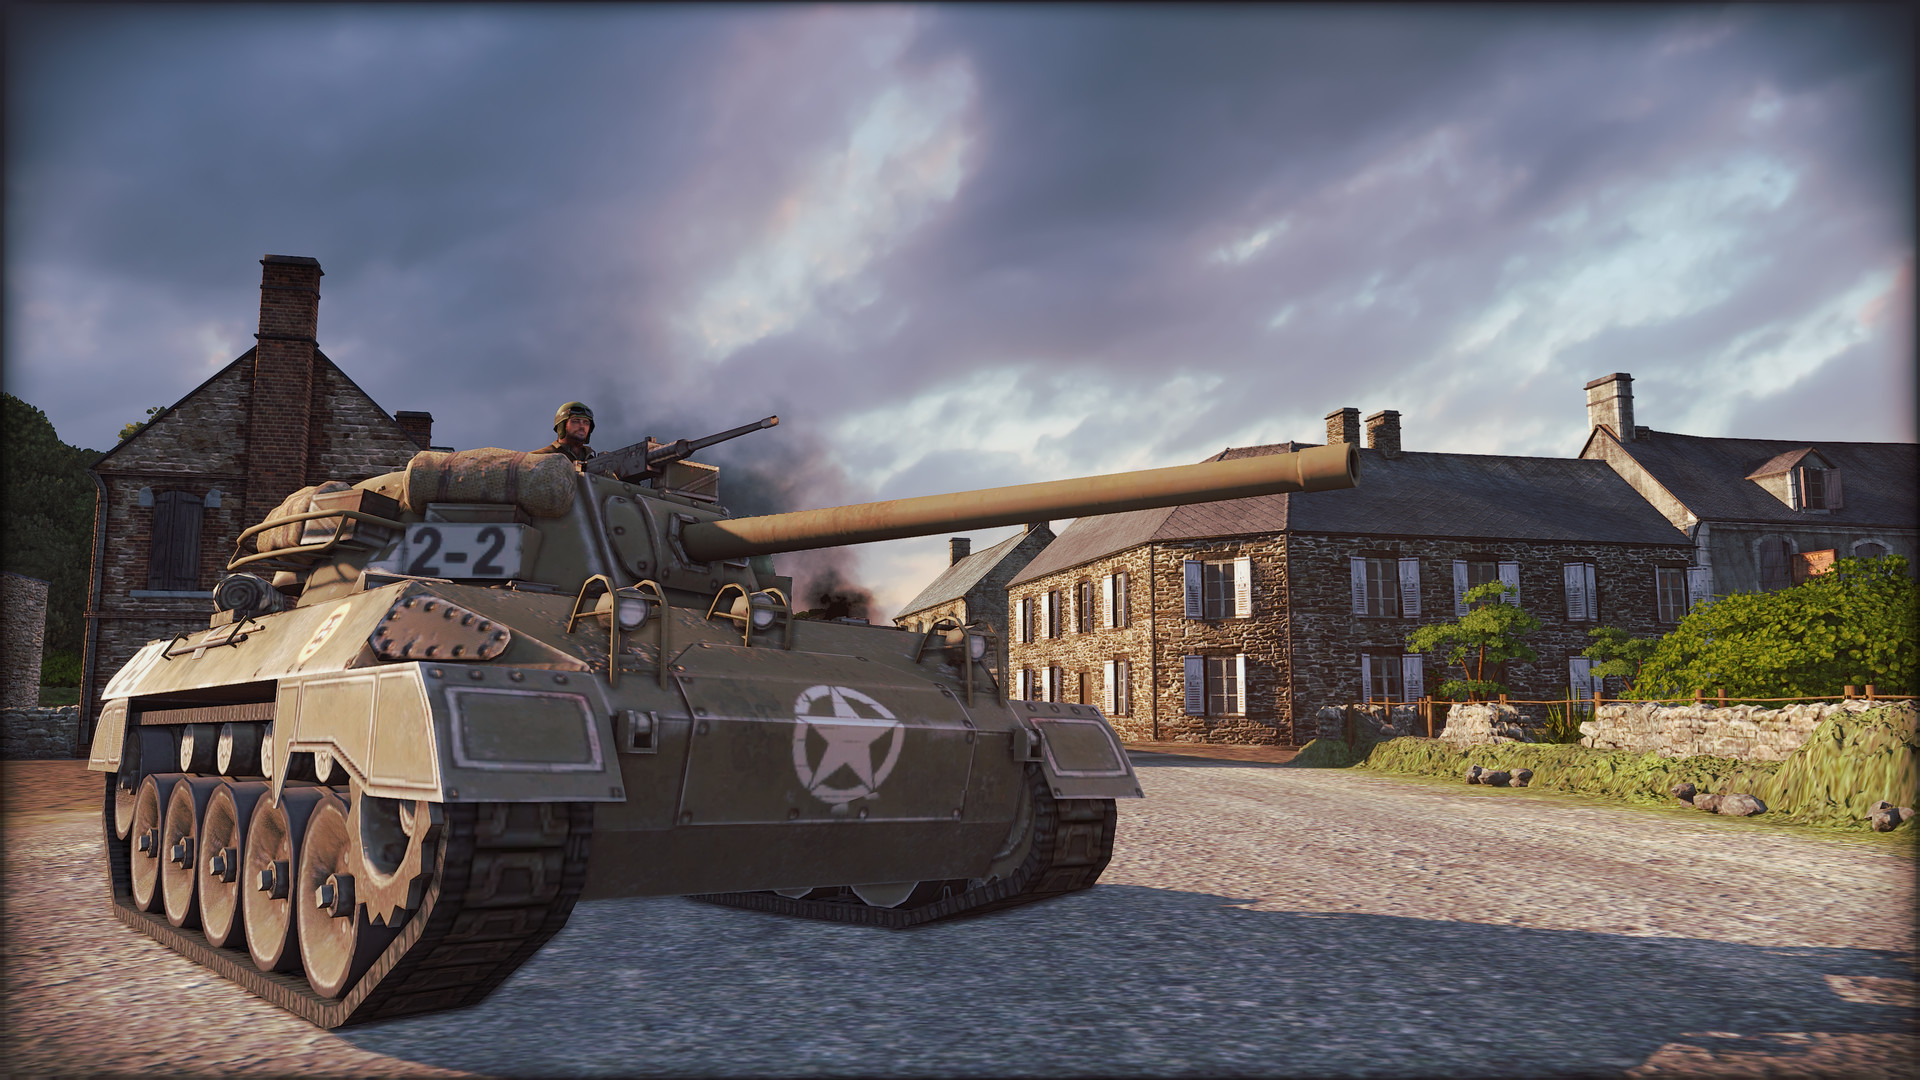 steel division normandy 44 download